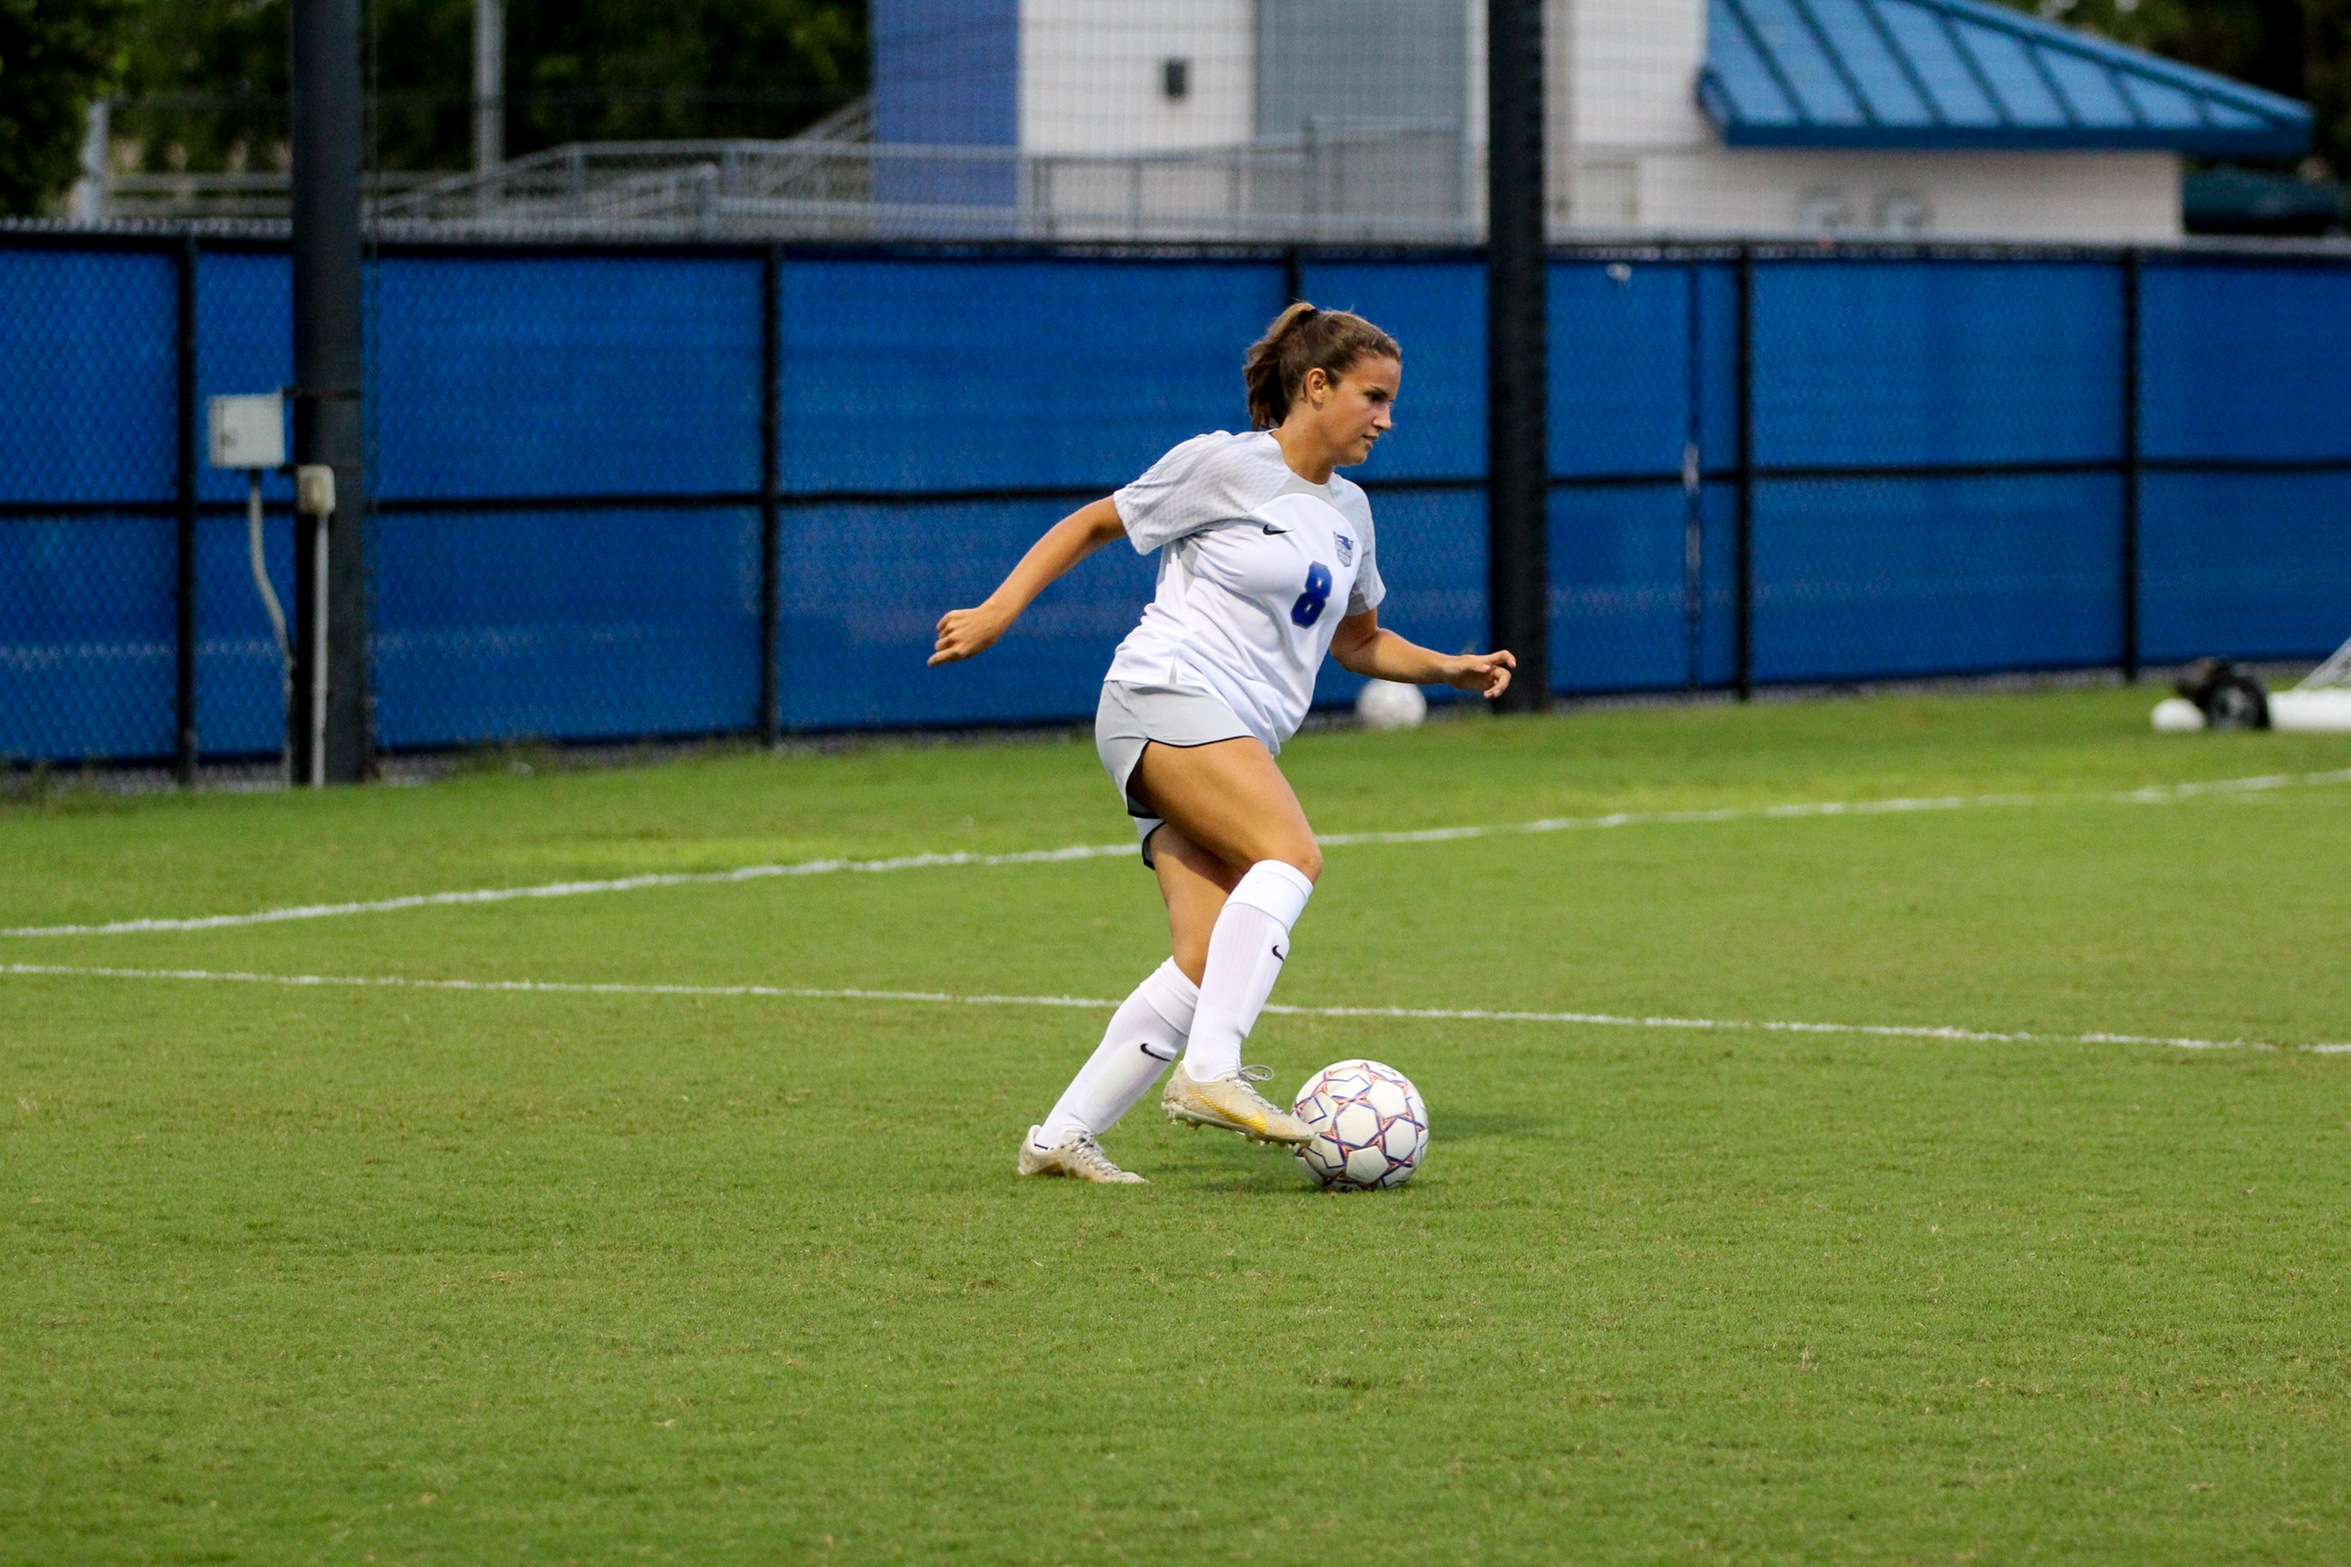 Eight Second Half Goals Over USC Lancaster Lead No. 5 Daytona State to their Sixth Win